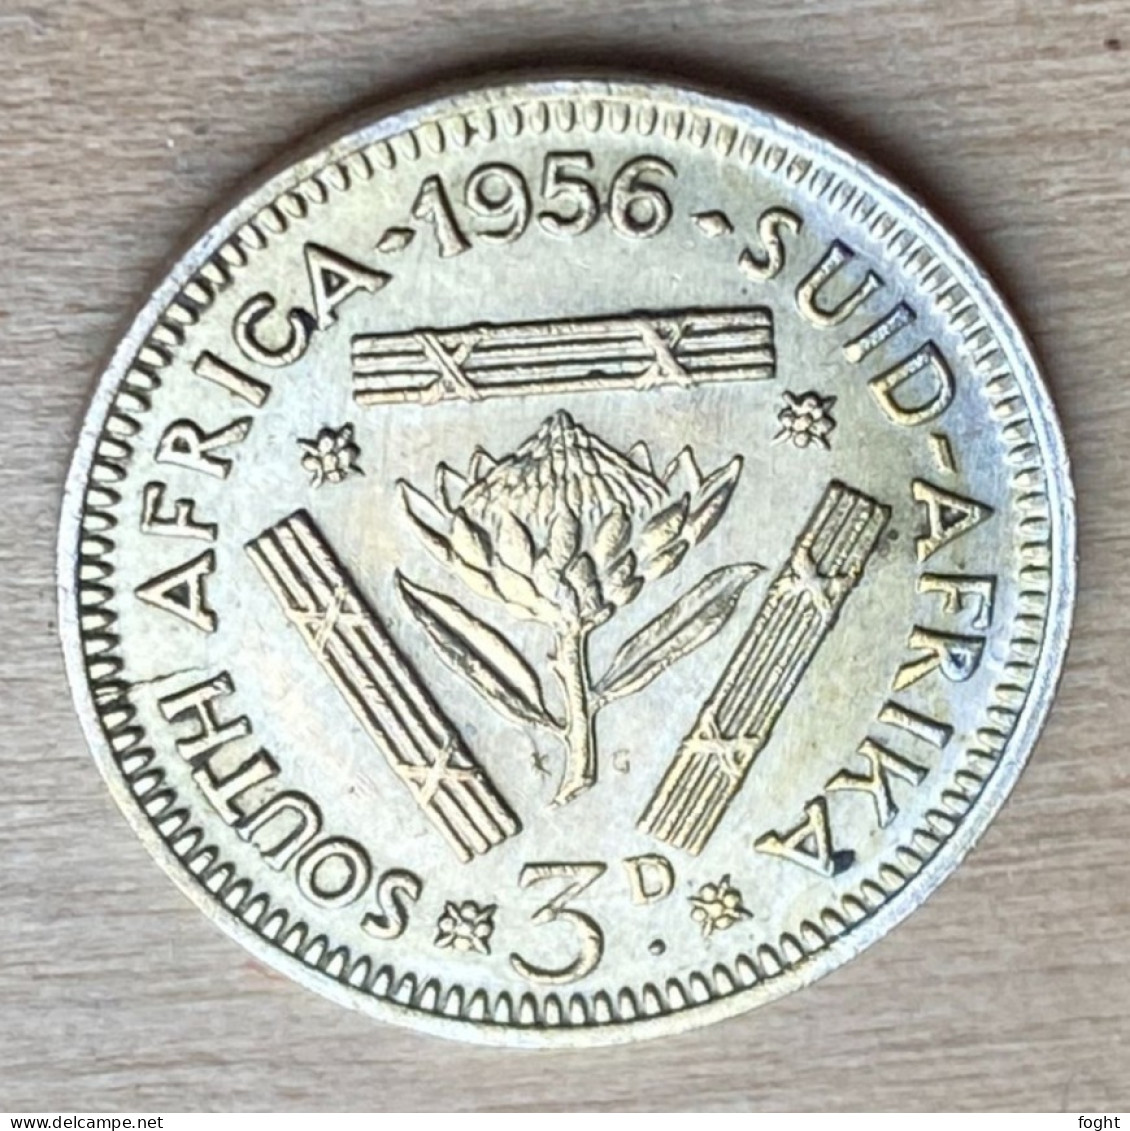 1956 South Africa .500 Silver Coin 3 Pence,KM#47,7271 - South Africa